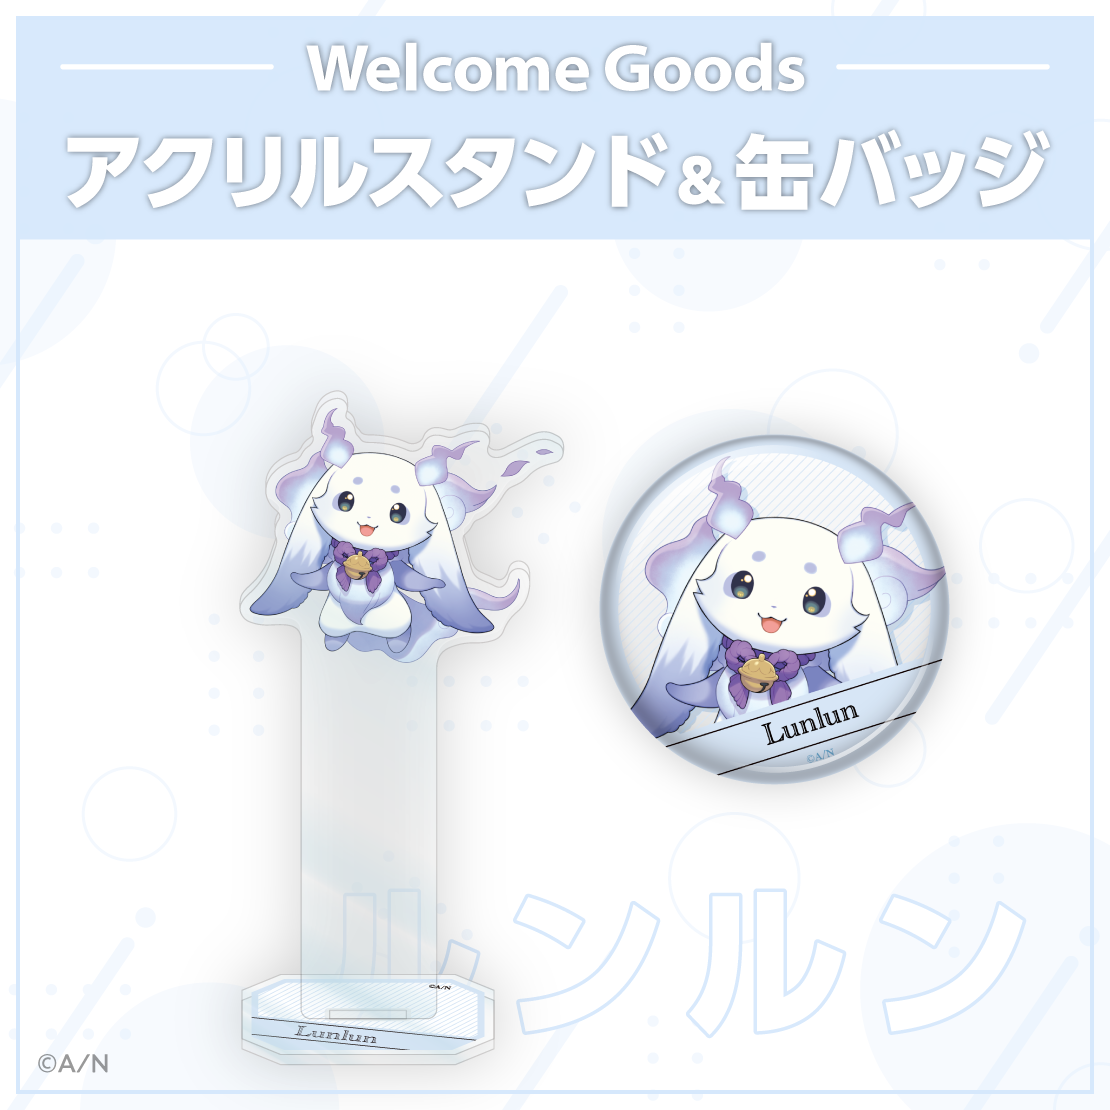 【Welcome Goods】ルンルン